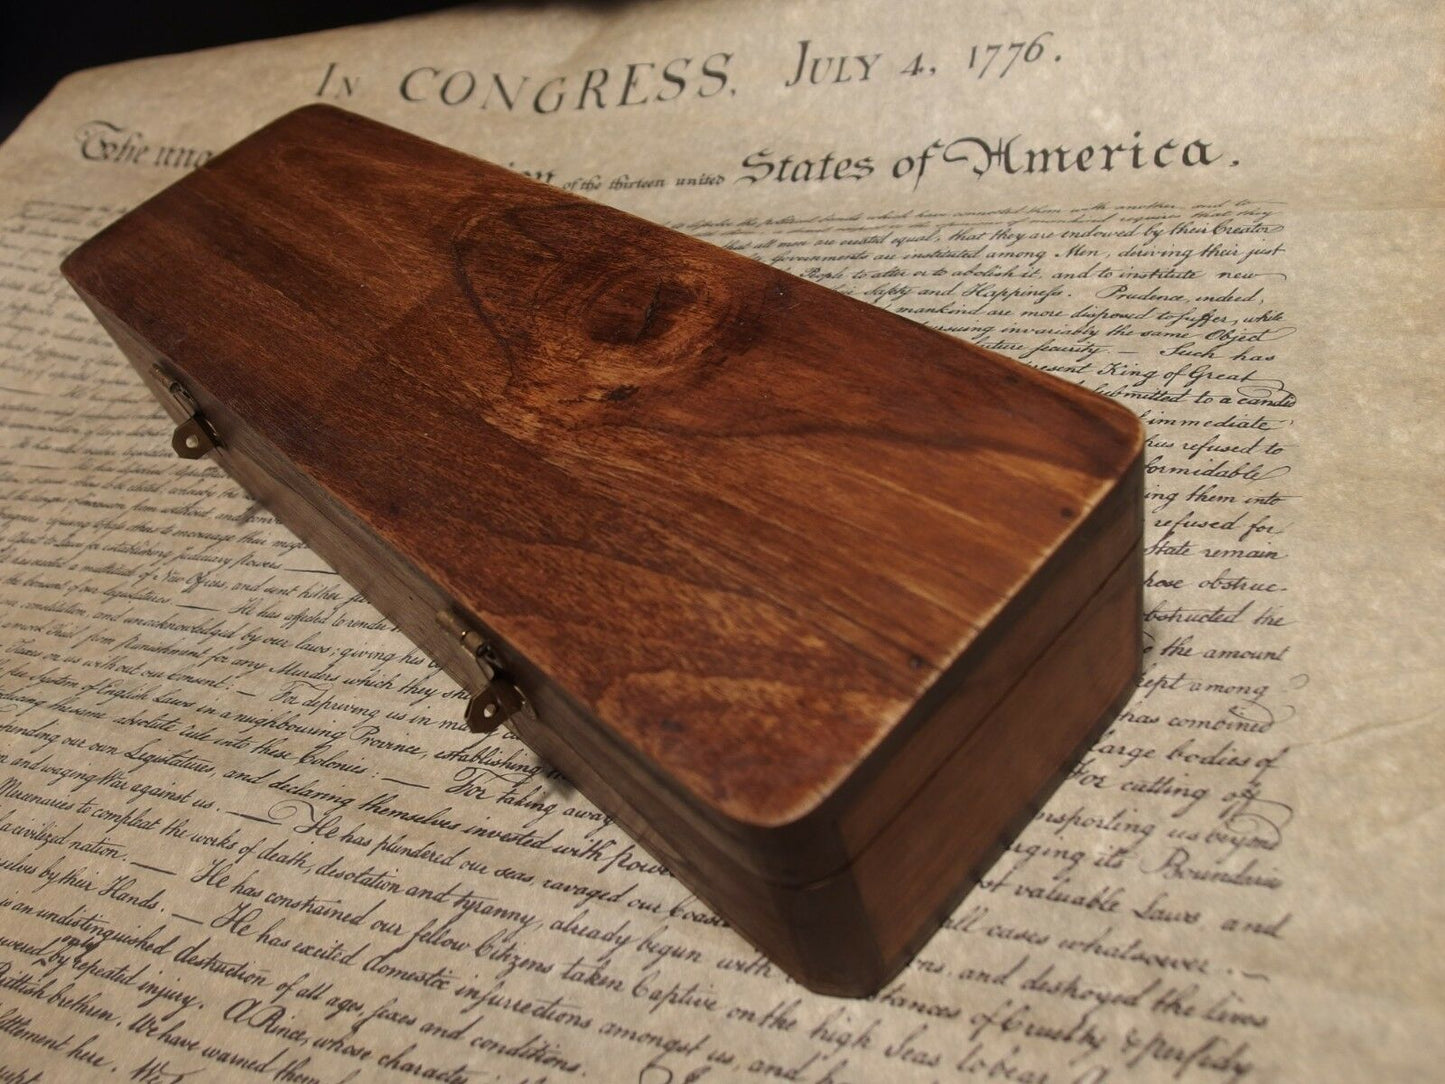 Antique Vintage Style Wood Writing Box Desk Set w Inkwell 2 Feather Dip Pen Ink - Early Home Decor